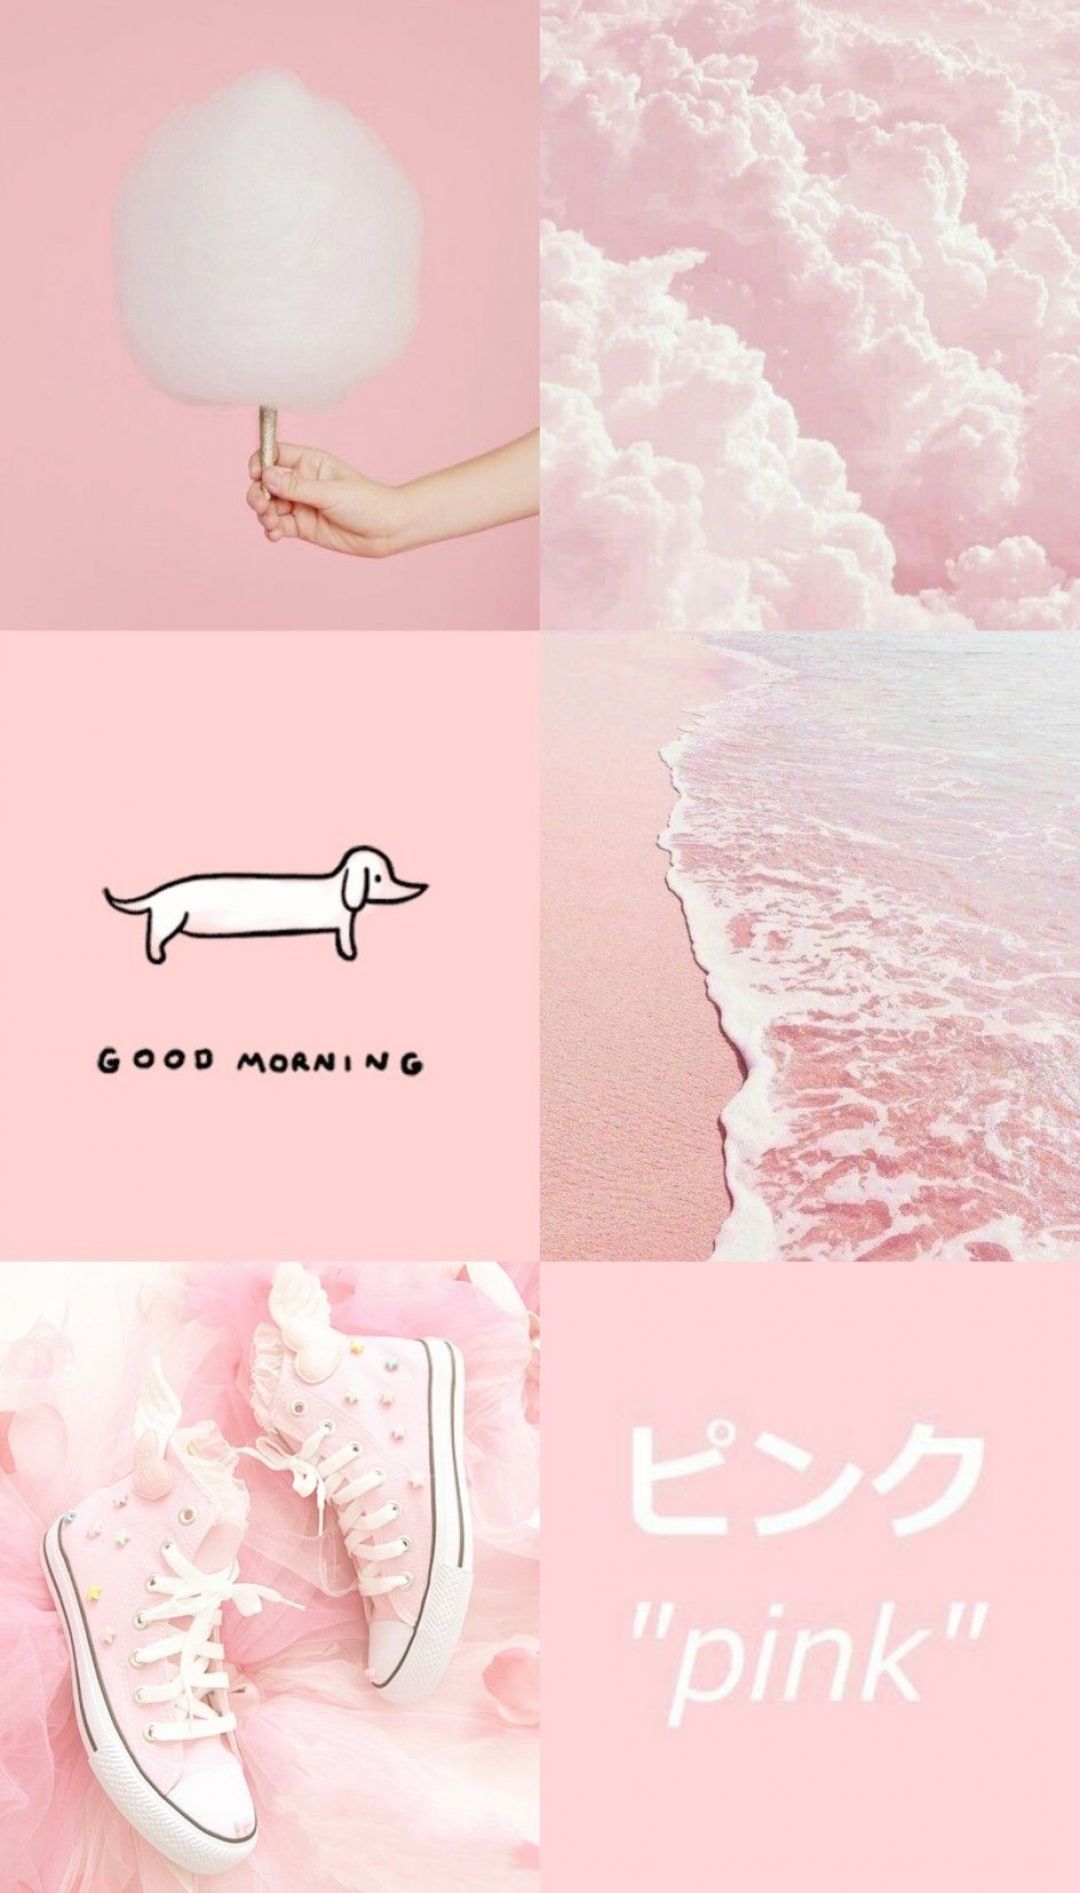 A collage of pink and white images - Pink, cute pink, pink phone, dog, cute iPhone, blush, hot pink, light pink, punk